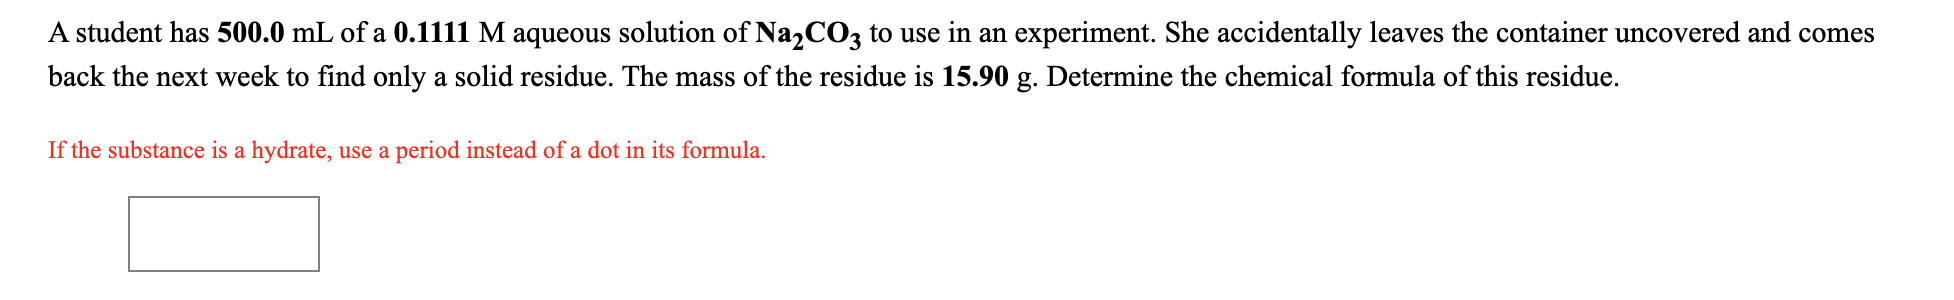 A student has 500.0 mL of a 0.1111 M aqueous solution of NazCO3 to use in an experiment. She accidentally leaves the container uncovered and comes
back the next week to find only a solid residue. The mass of the residue is 15.90 g. Determine the chemical formula of this residue.
If the substance is a hydrate, use a period instead of a dot in its formula.
